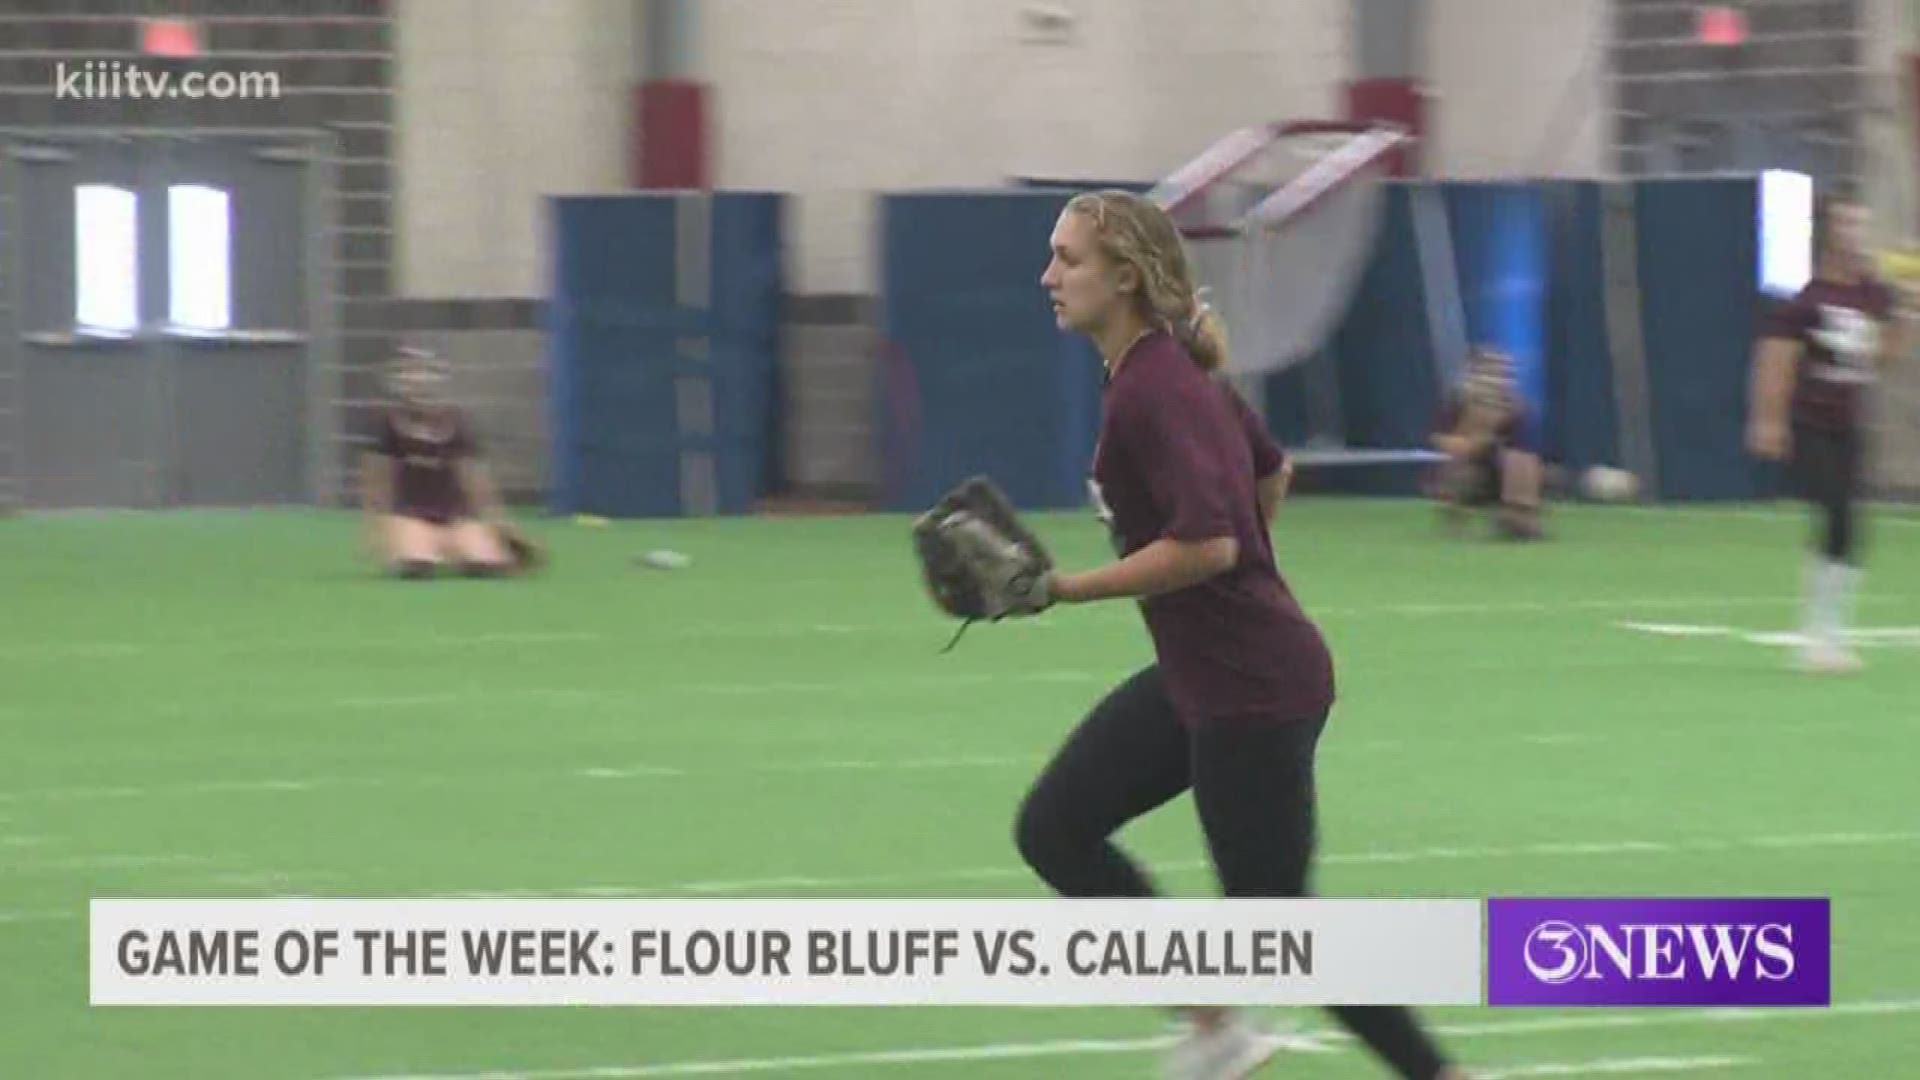 Flour Bluff went 2-1 against Calallen this season, but won both district games against the Wildcats en route to a 29-5A championship.